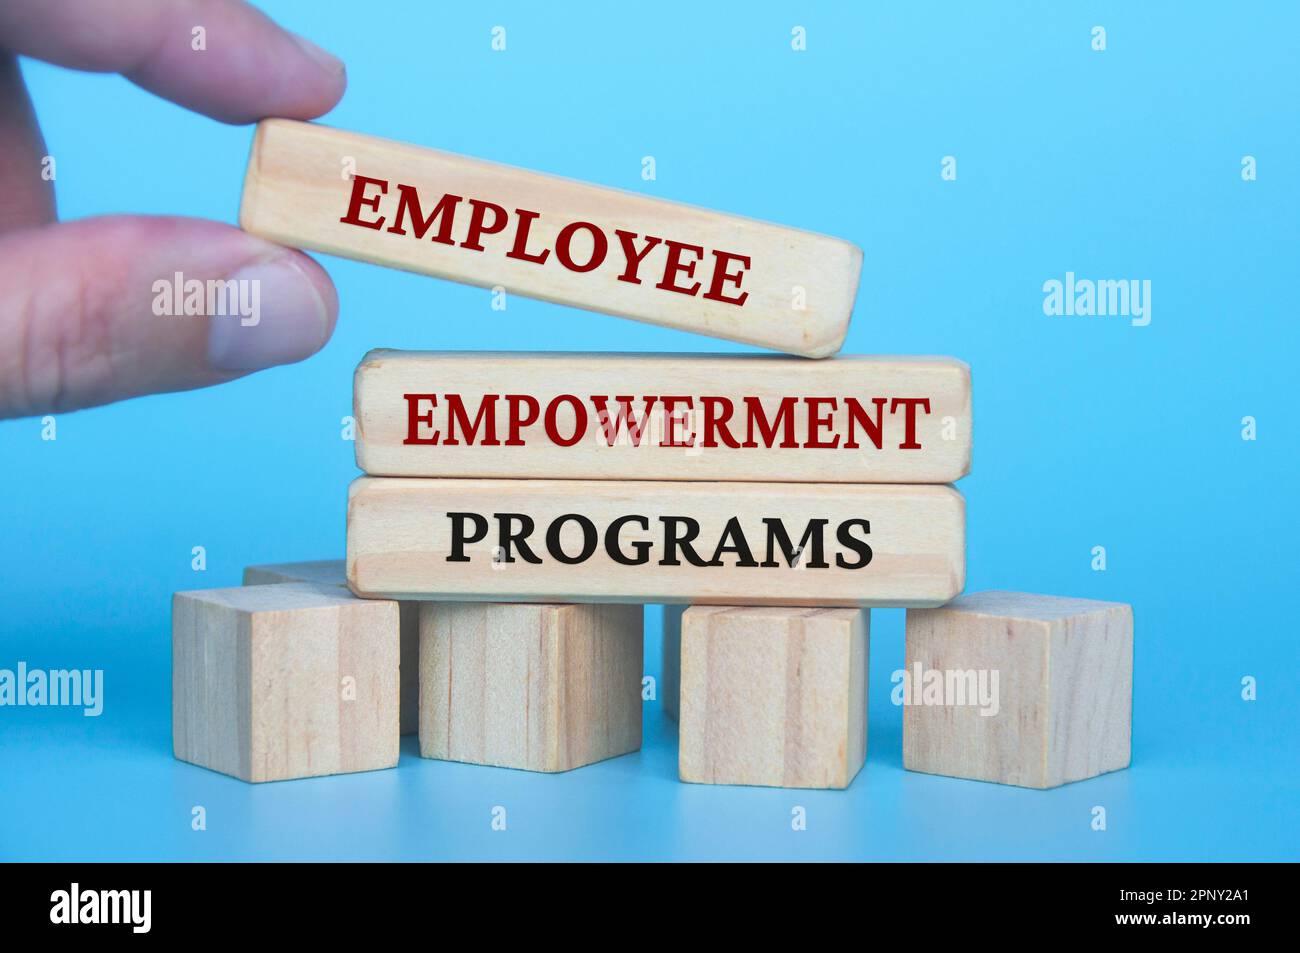 Hand placing employee empowerment programs text on wooden blocks with blue cover background. Employee empowerment concept Stock Photo